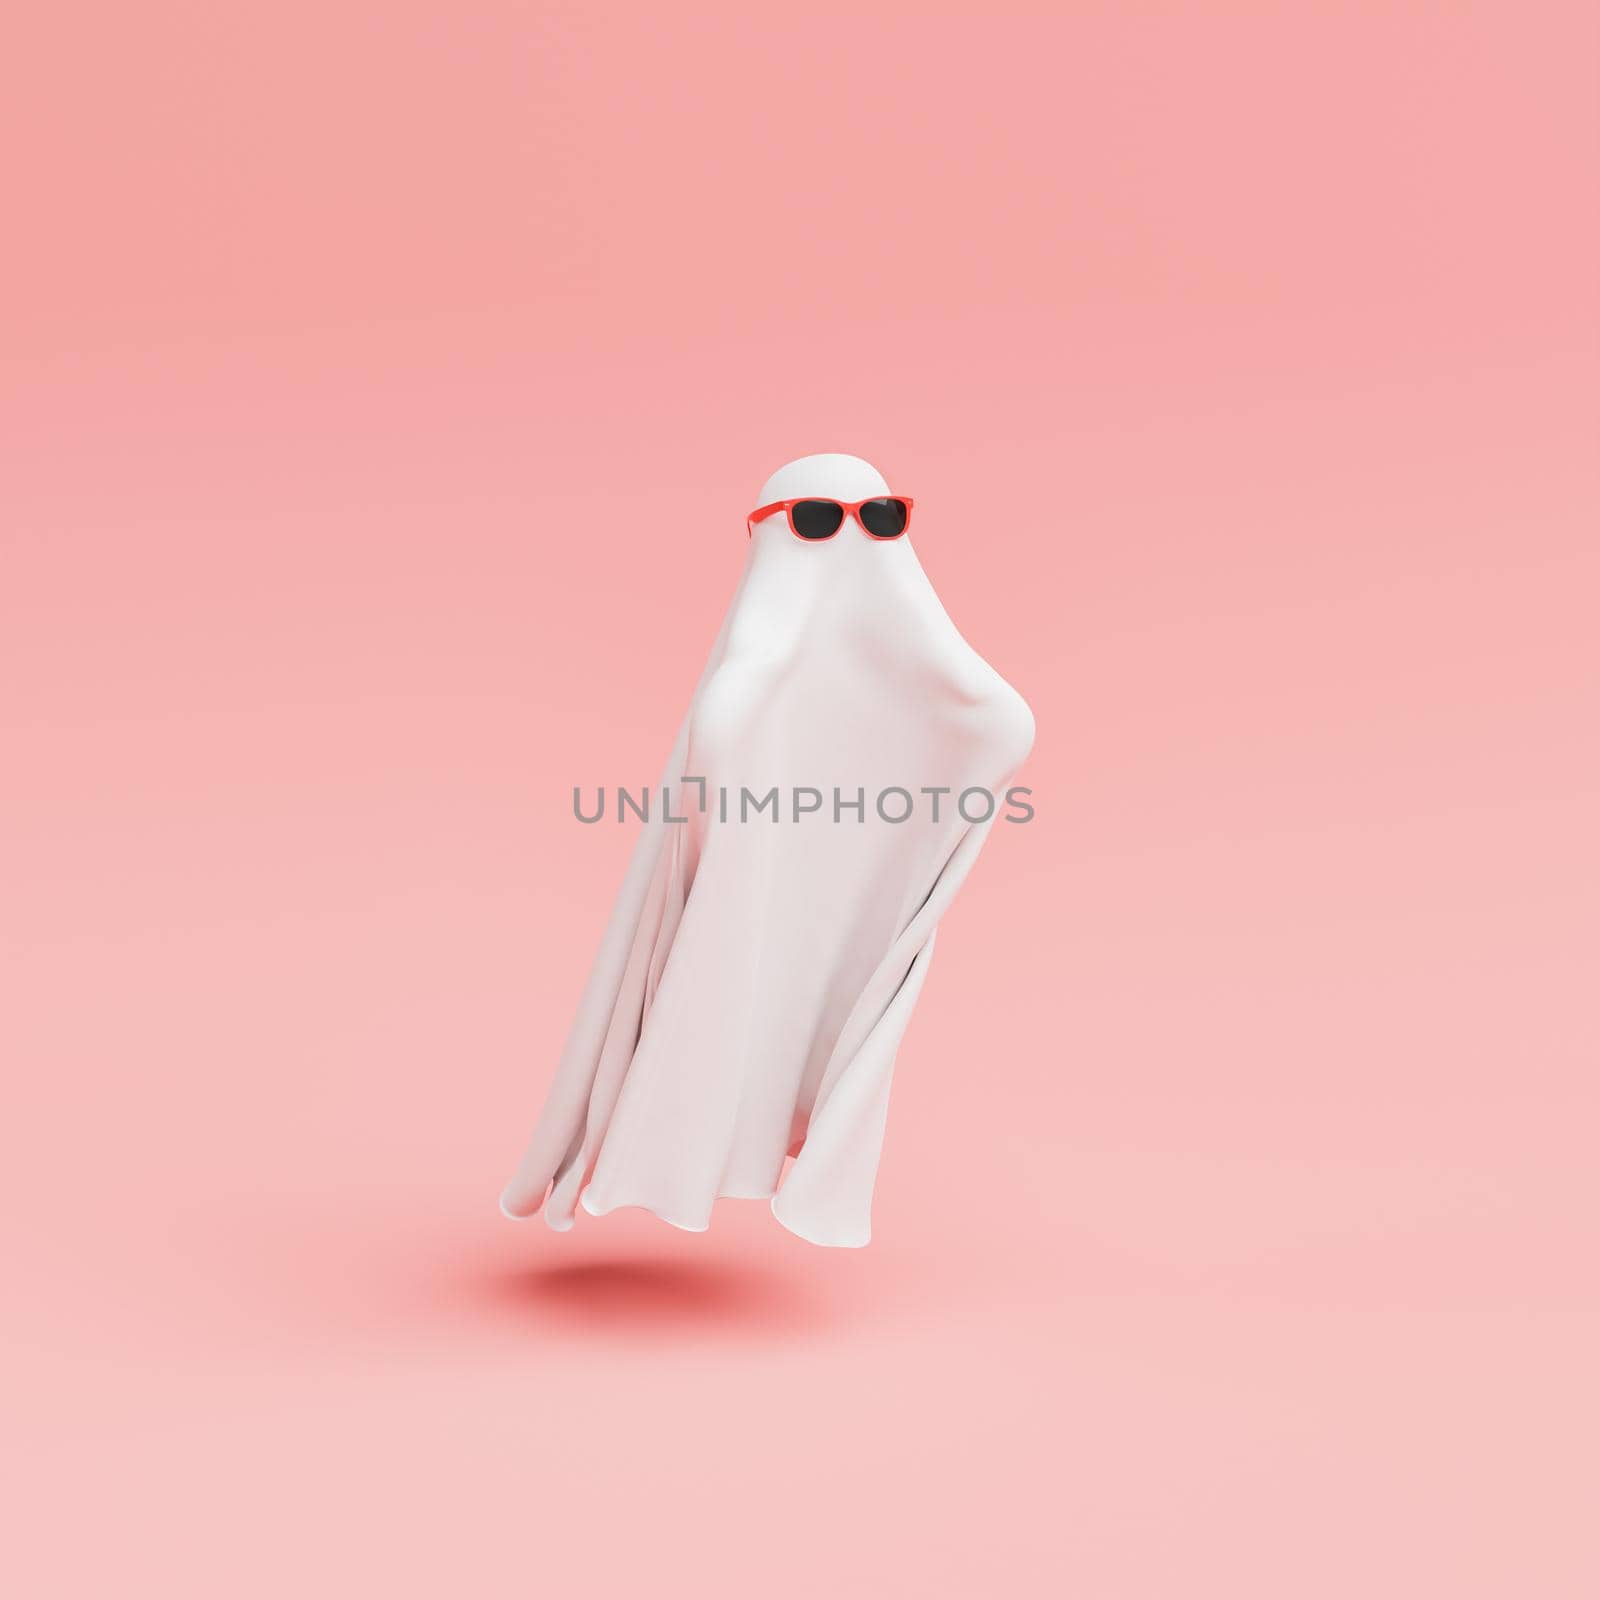 ghost with red sunglasses, white blanket and outstretched arms on minimalistic pastel background by asolano